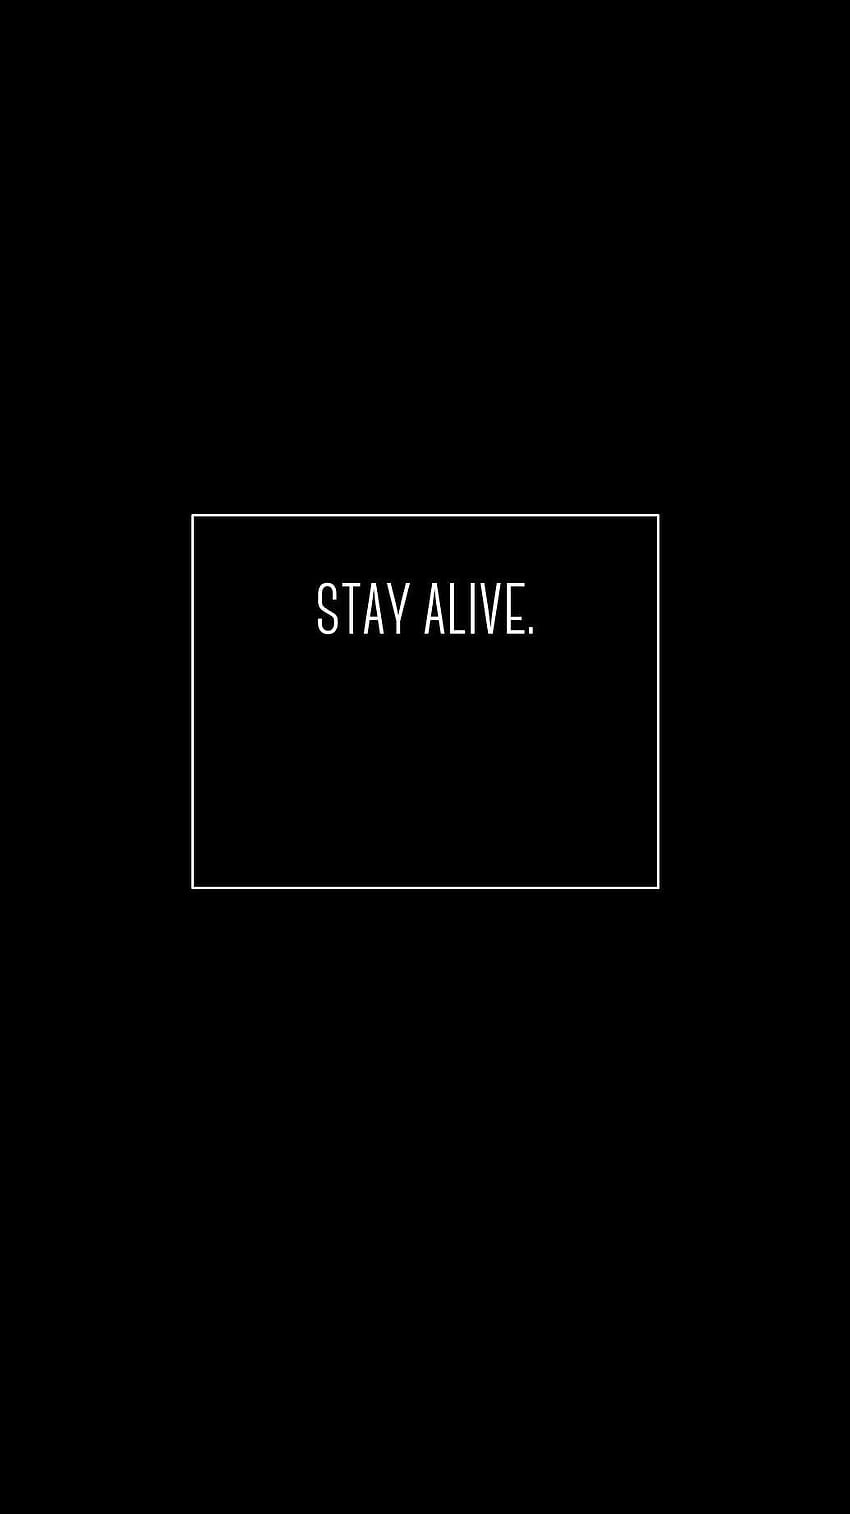 Stay Alive HD phone wallpaper